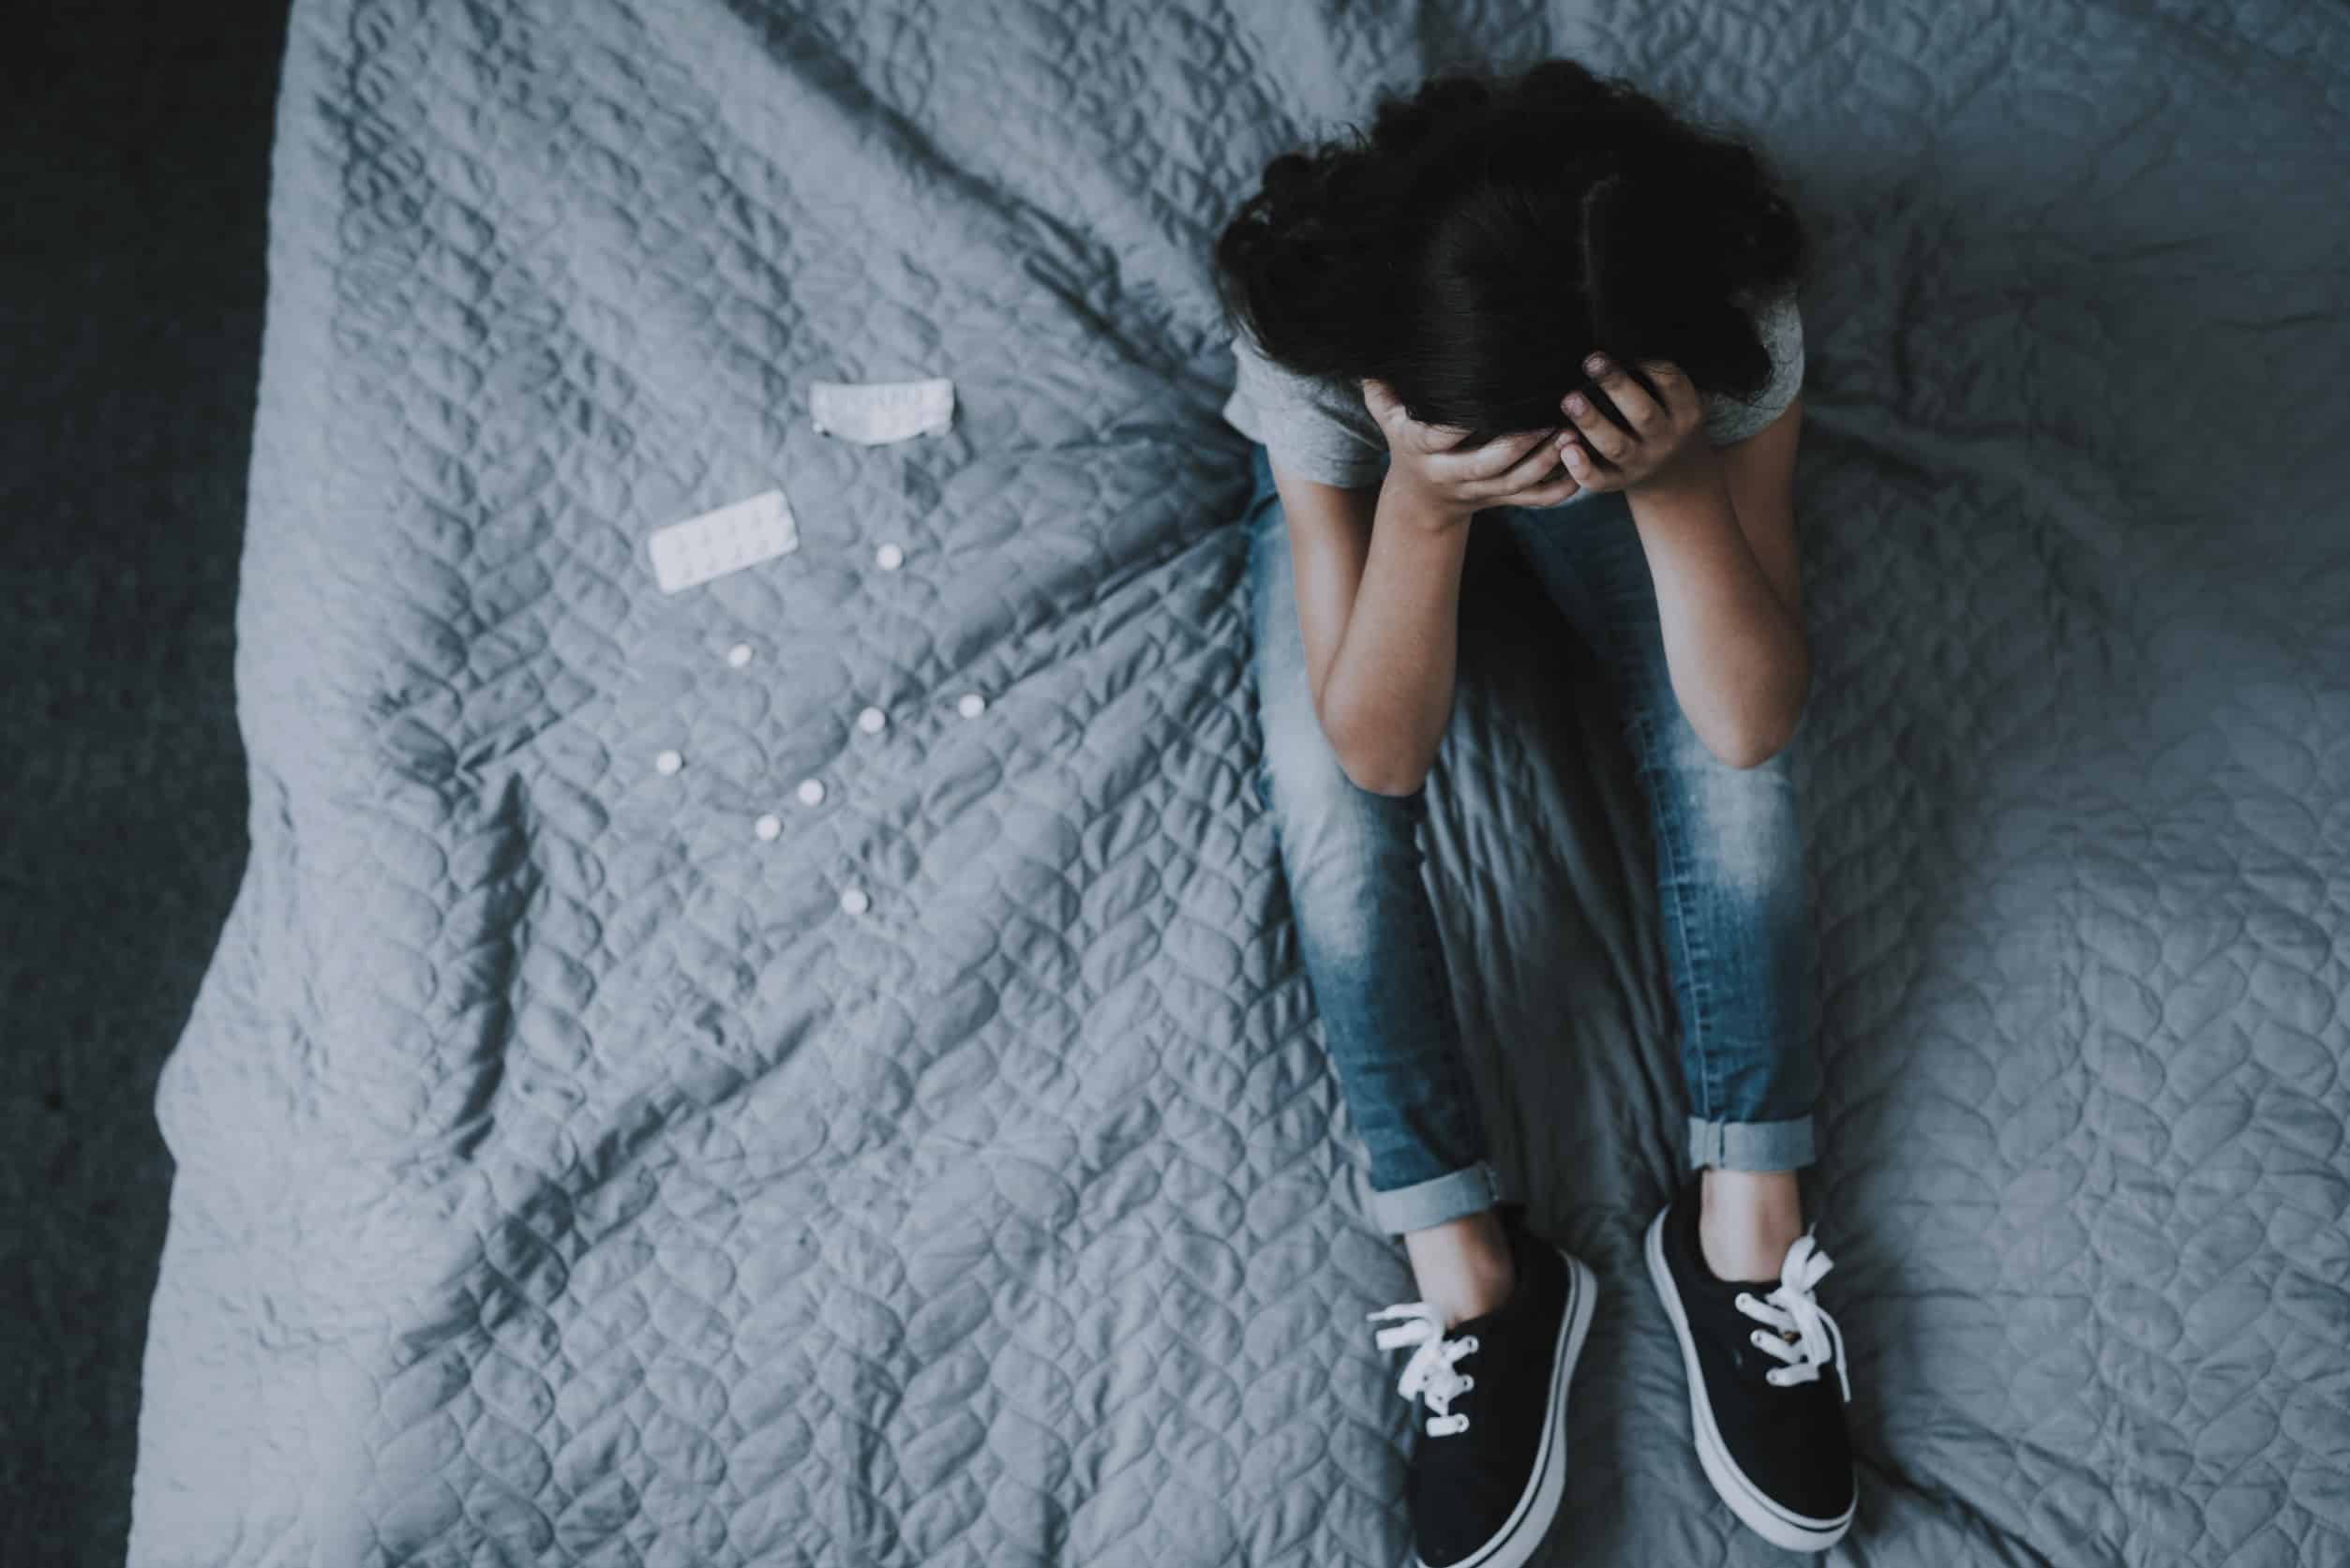 A teen girl sits on her bed with her head in her hands, and a few pills on the bed beside her, showing the frustration of running out of ADHD medications during the stimulant shortage.